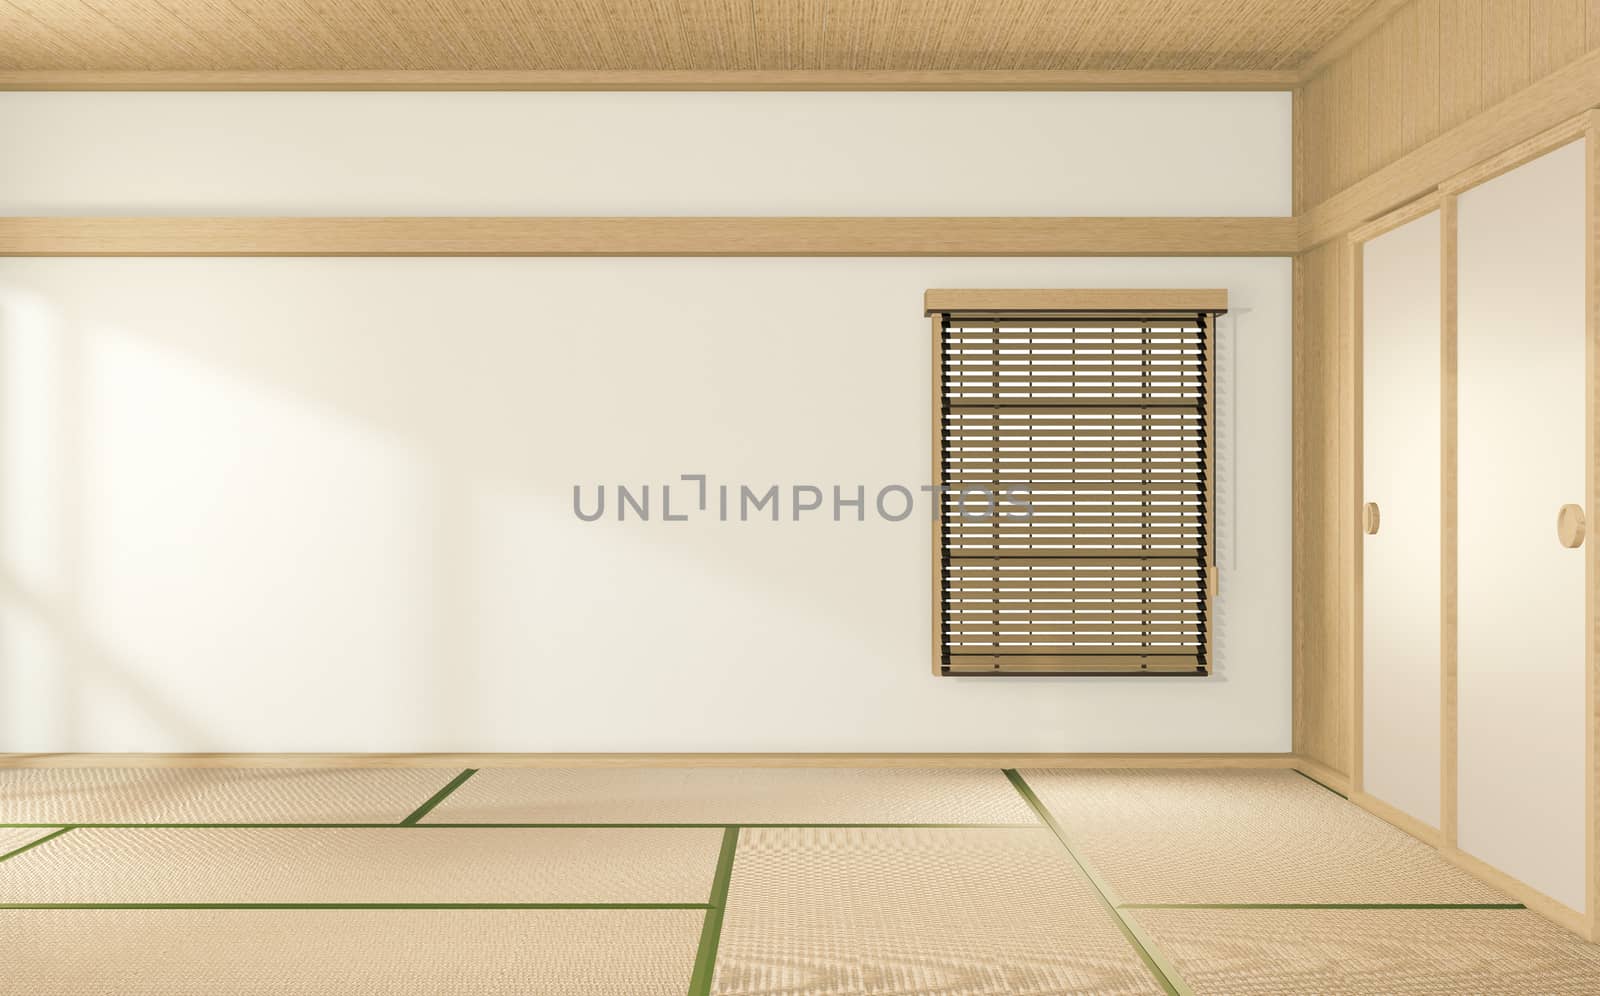 tropical style room interior, empty room japan style. 3D rendering